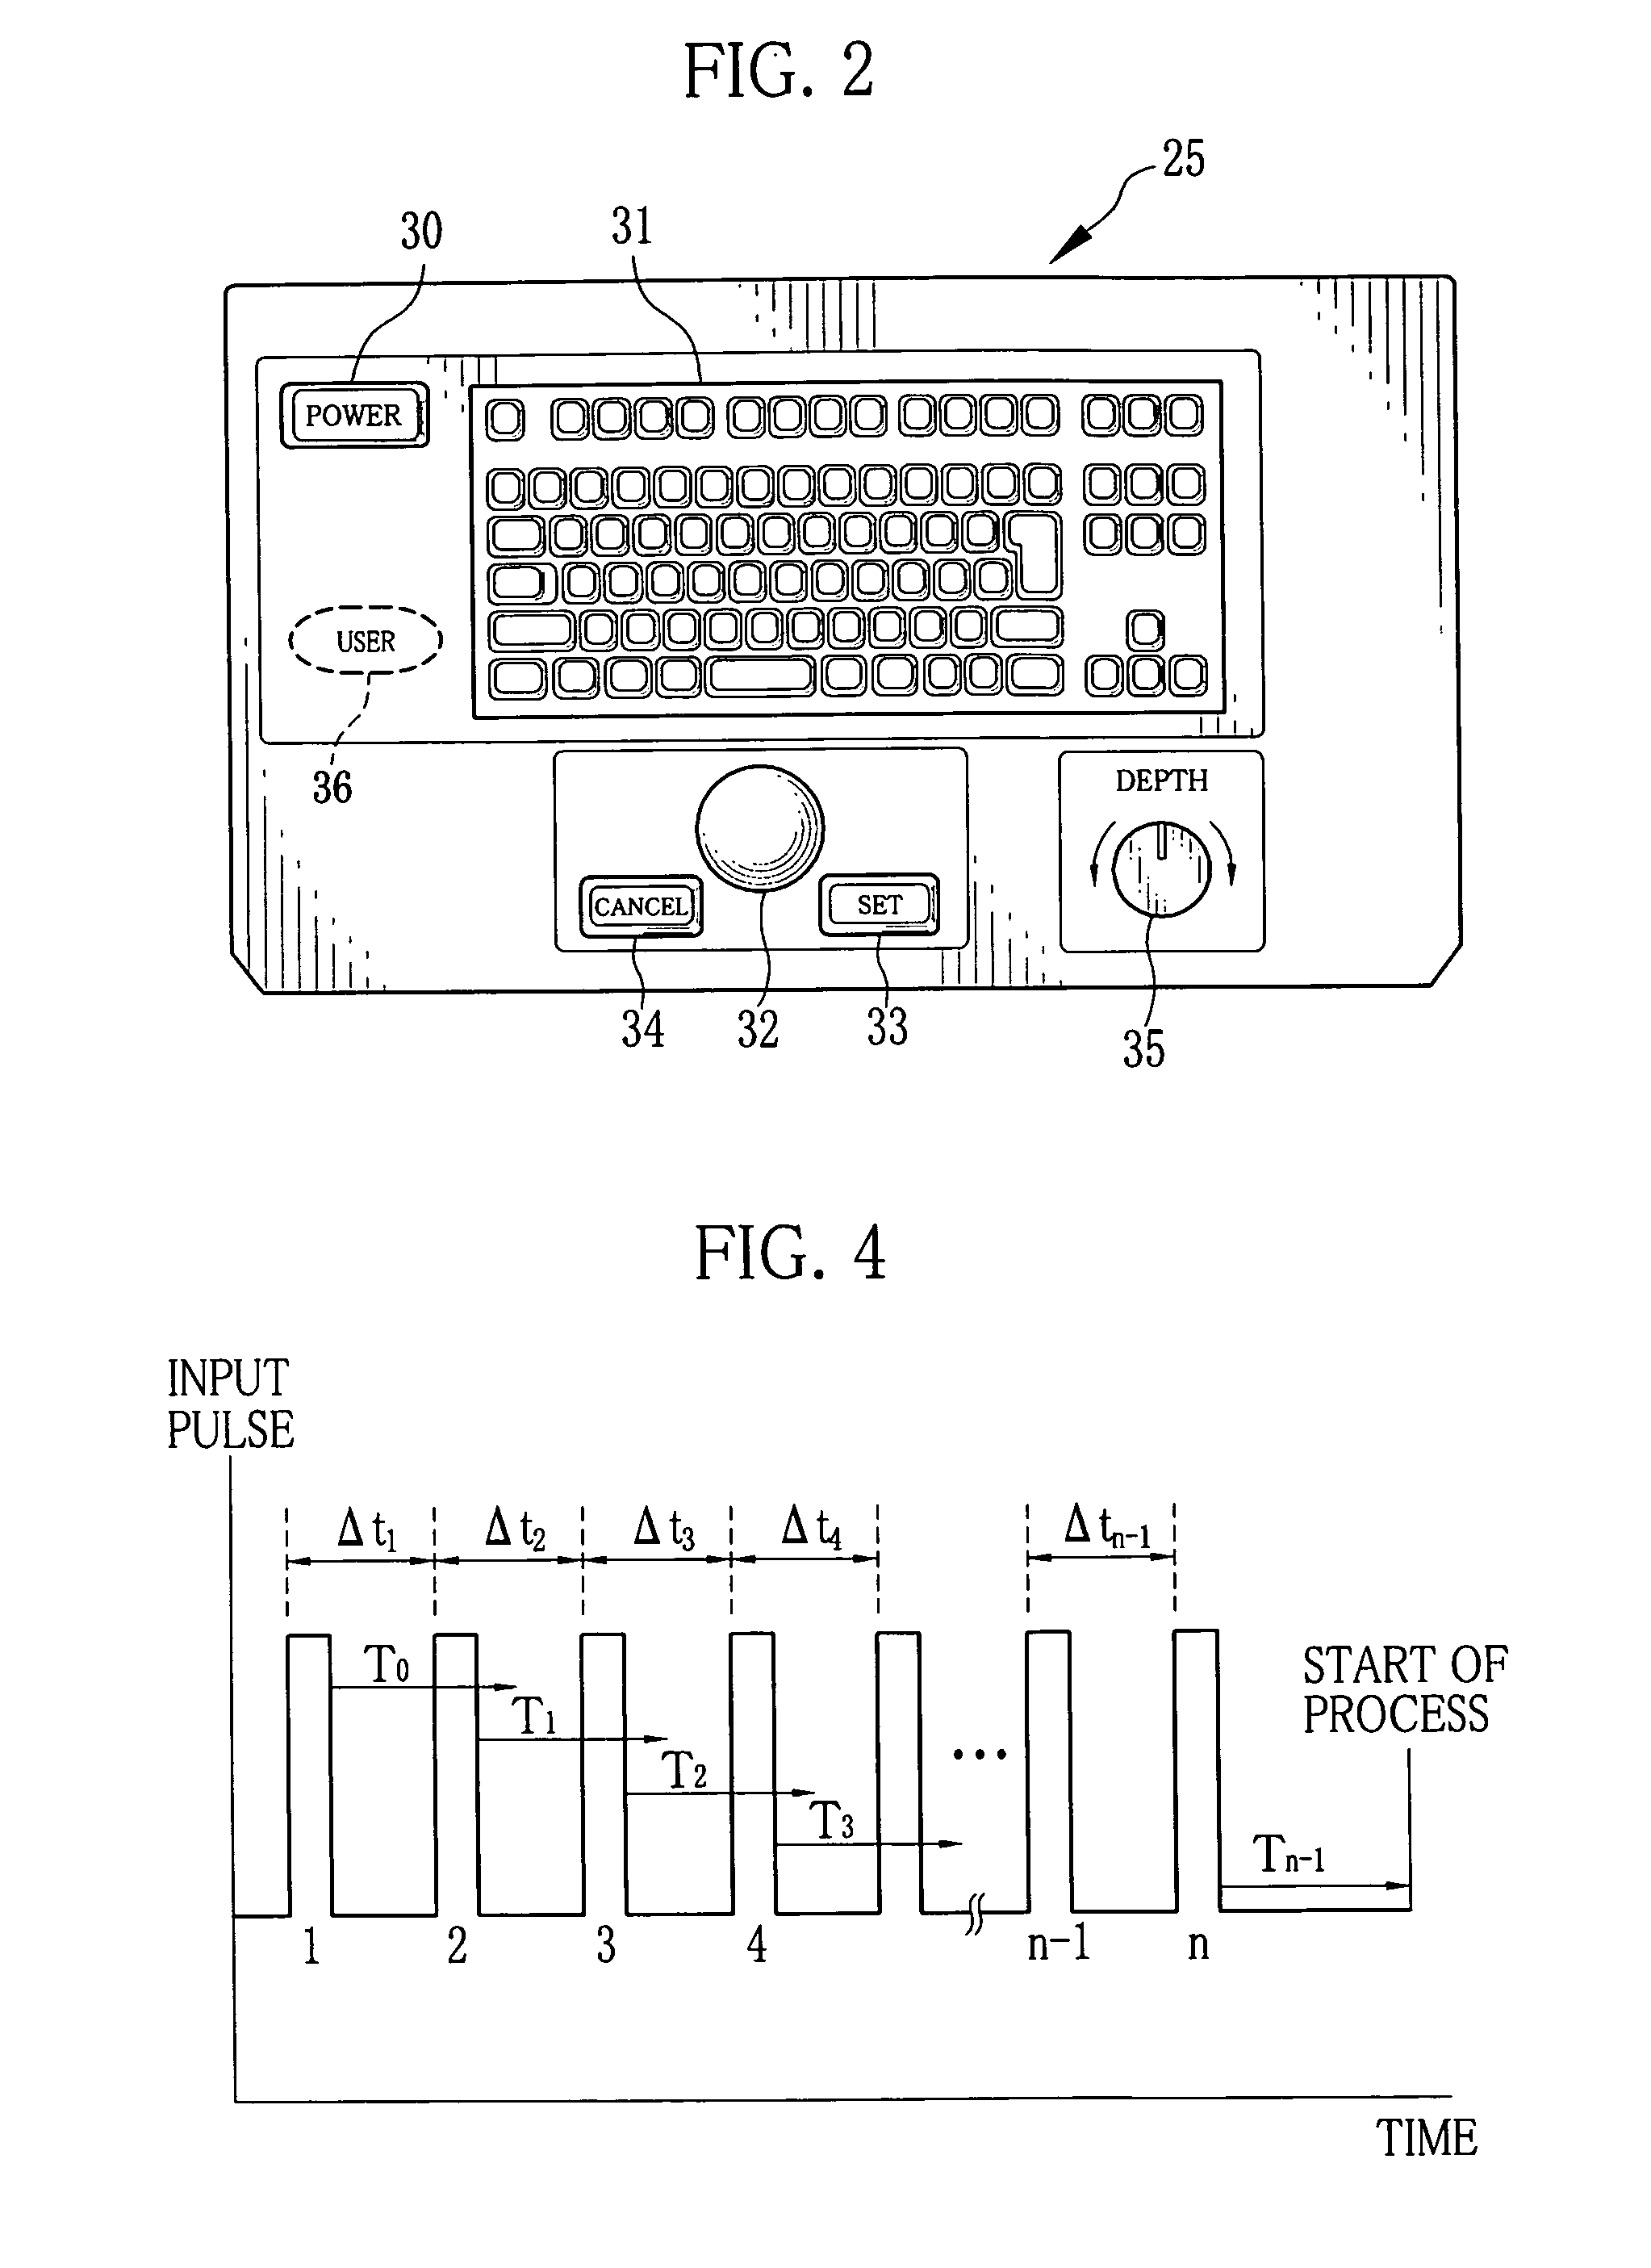 Ultrasound observation device and method for controlling operation thereof